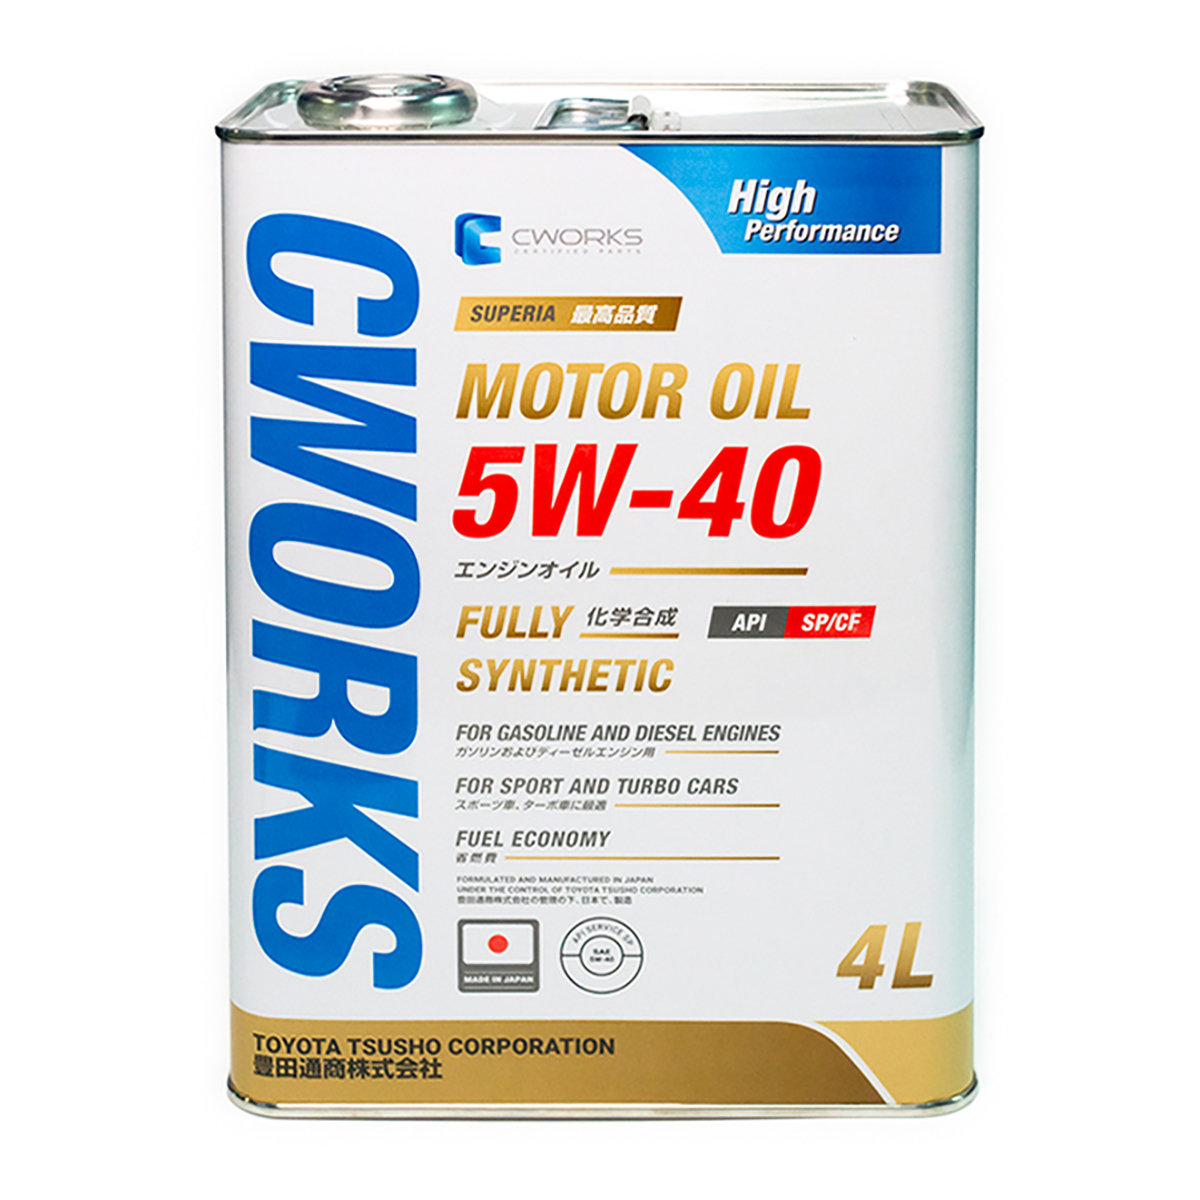 Superia motor OIL 5w-40 sp/cf, 4L Масло моторное - CWORKS A13SR2004